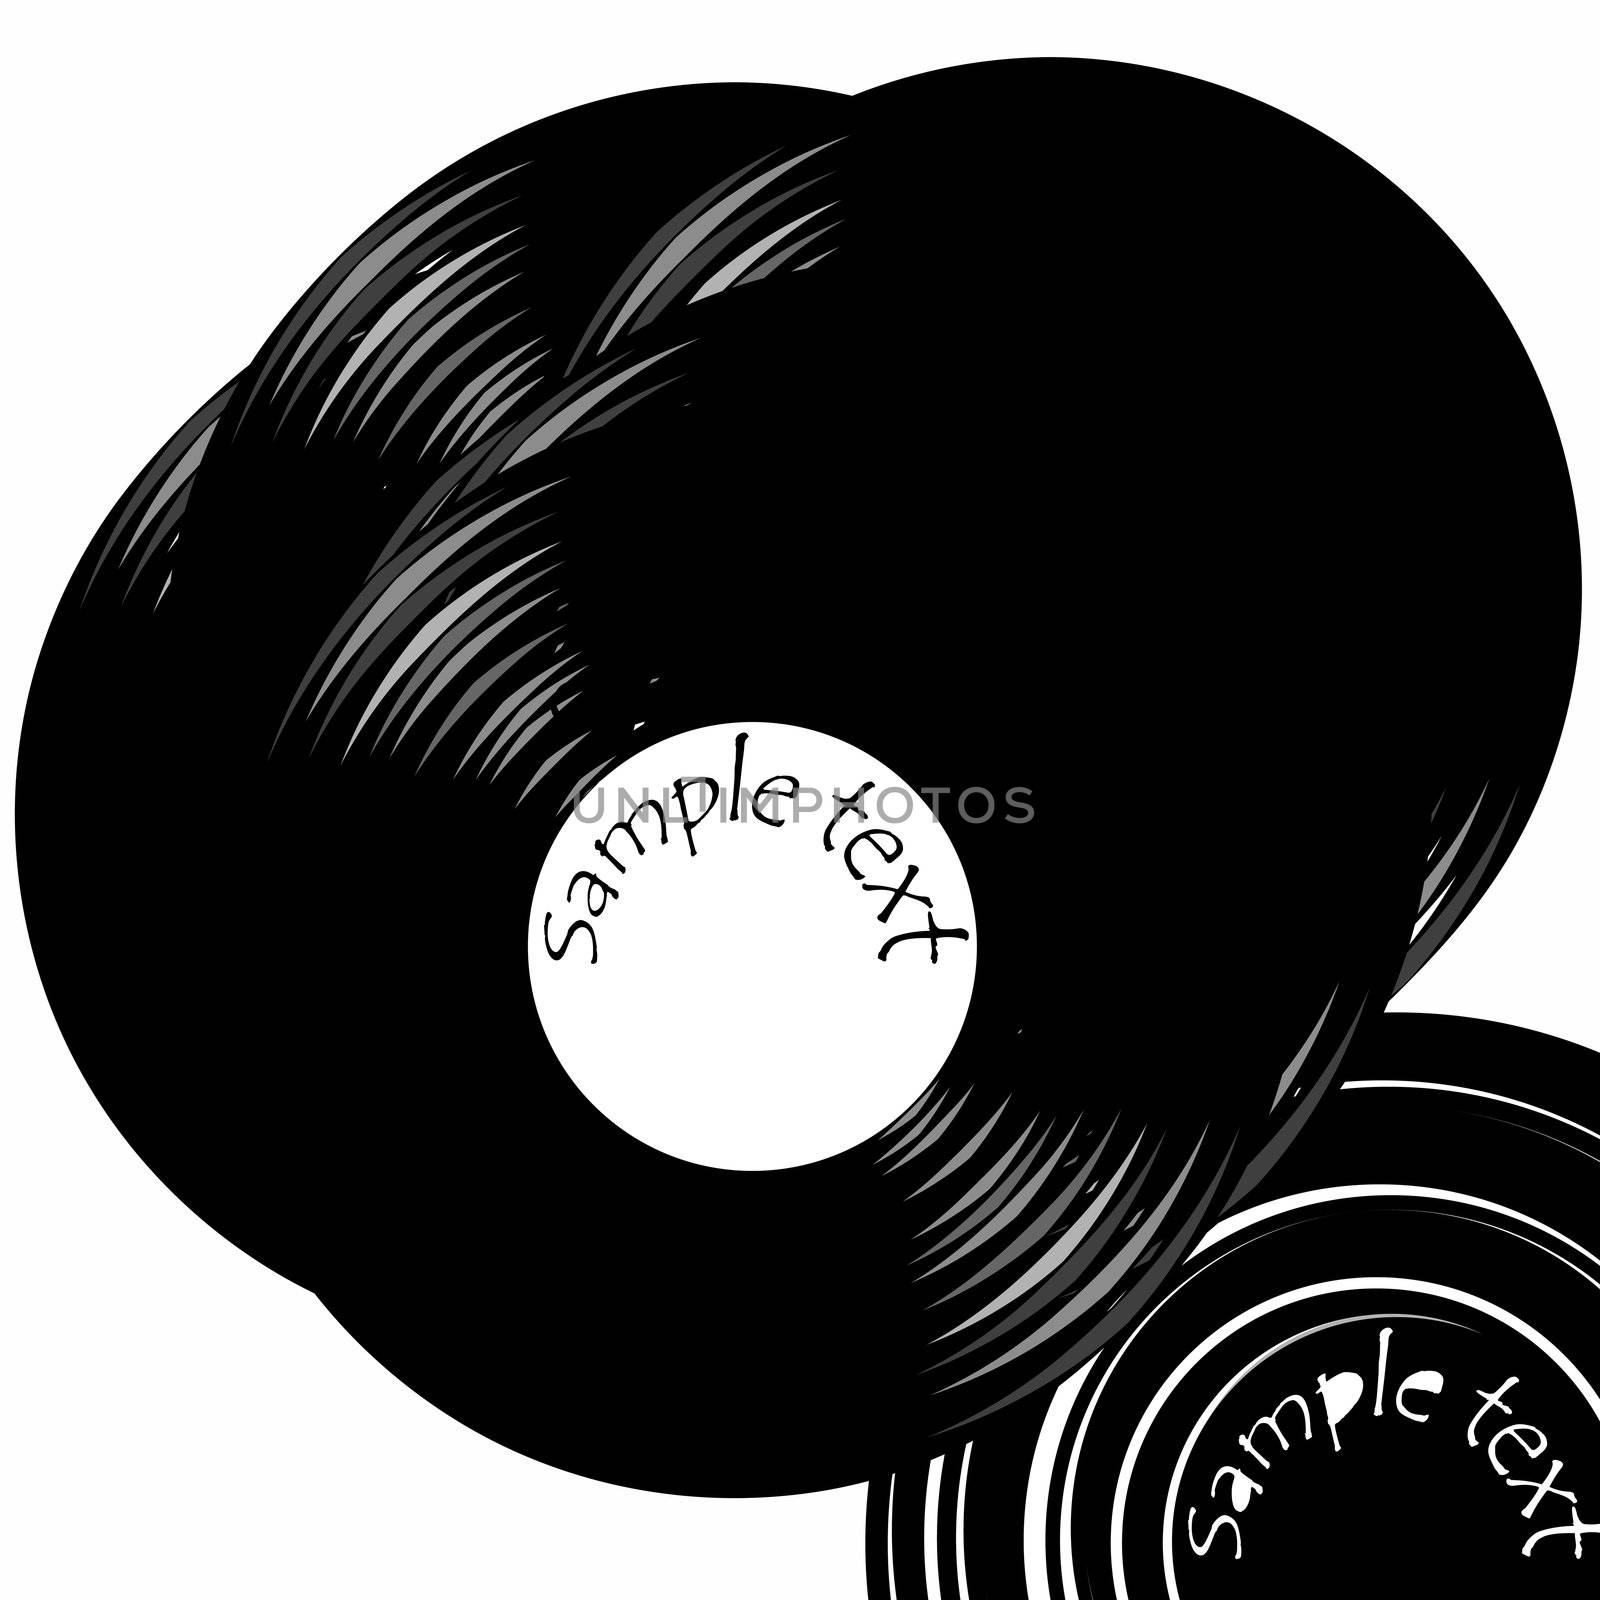 couple of vintage record vynils with space for text, vector art illustration; more drawings in my gallery